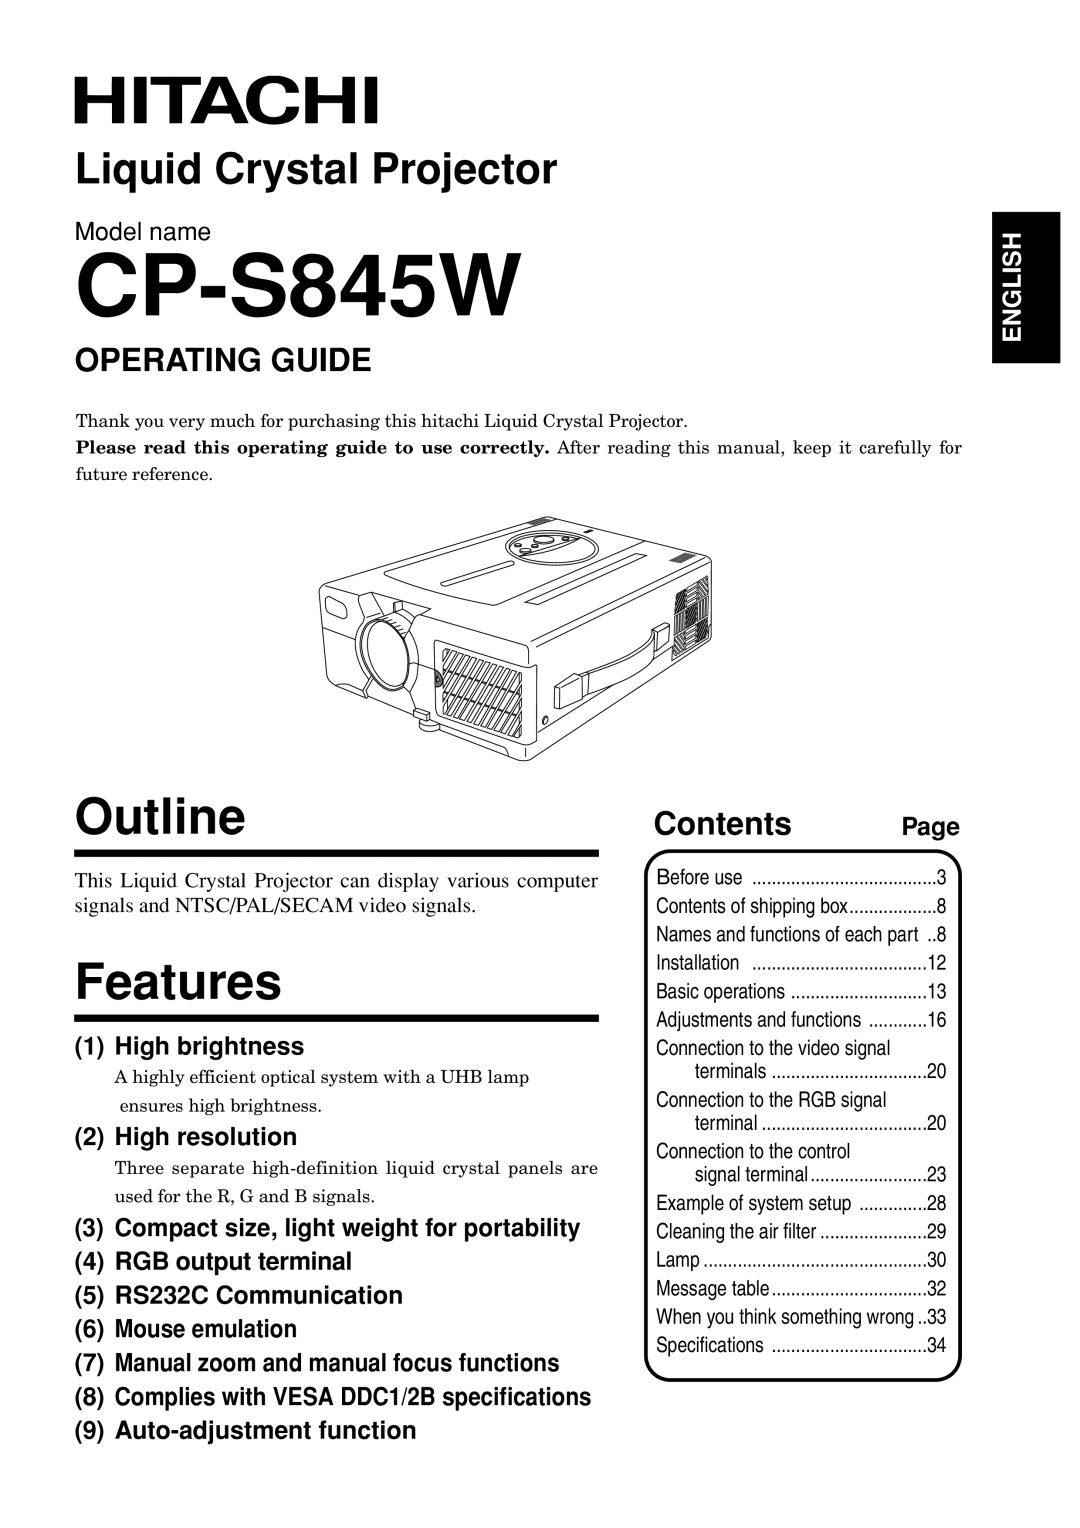 Hitachi CP-S845W specifications Outline, Features, Liquid Crystal Projector, Operating Guide, Contents, Model name, Page 